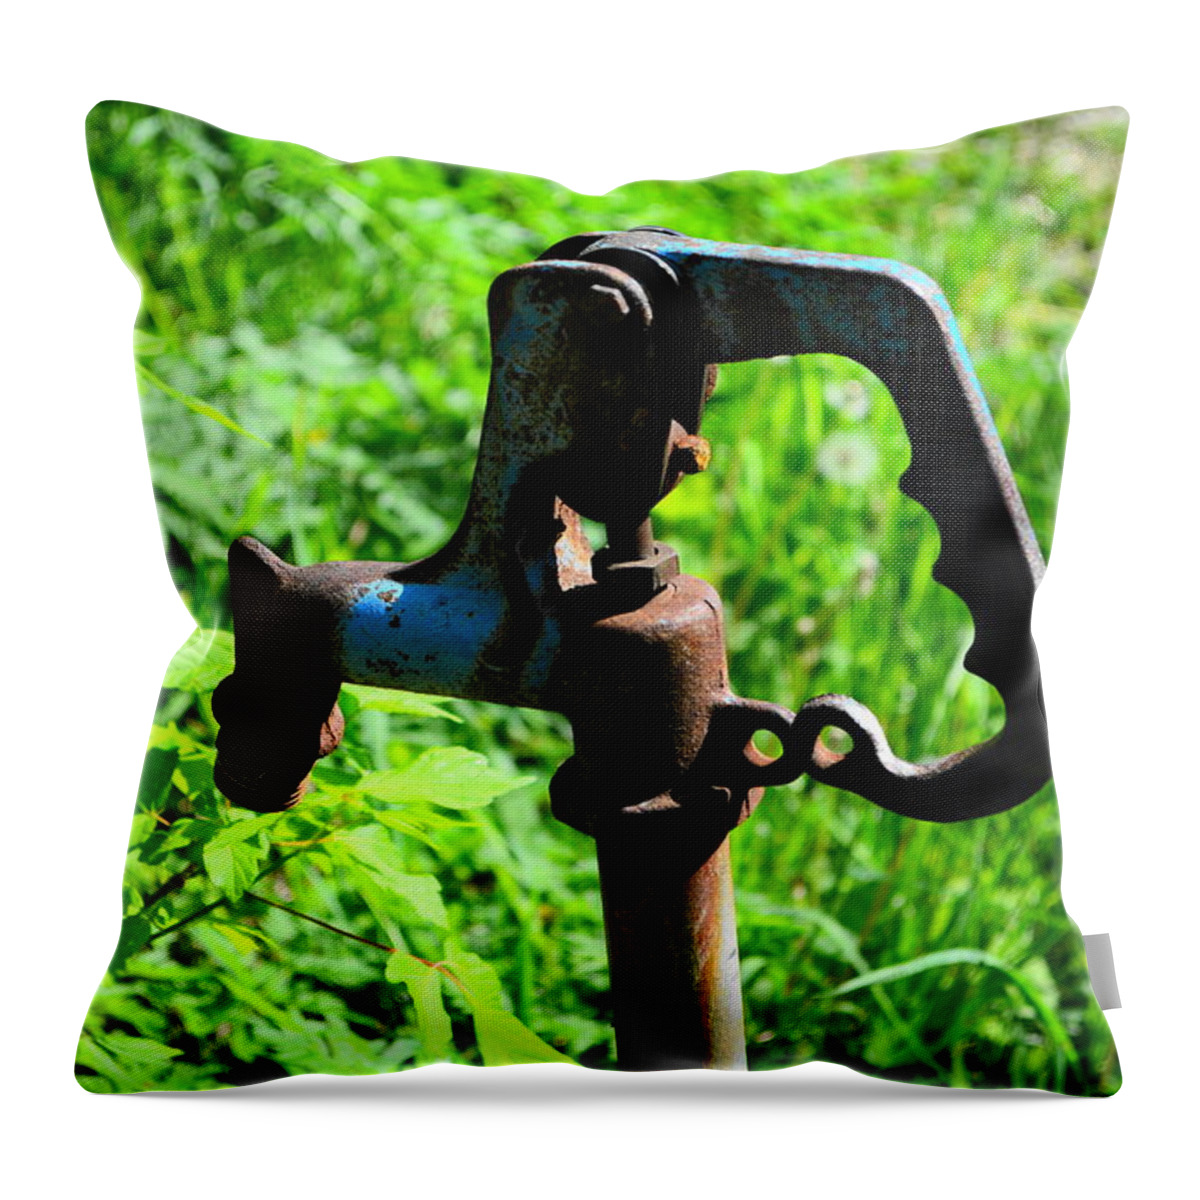 Water Pump Throw Pillow featuring the photograph The Old Rusty Water Pump by Stacie Siemsen